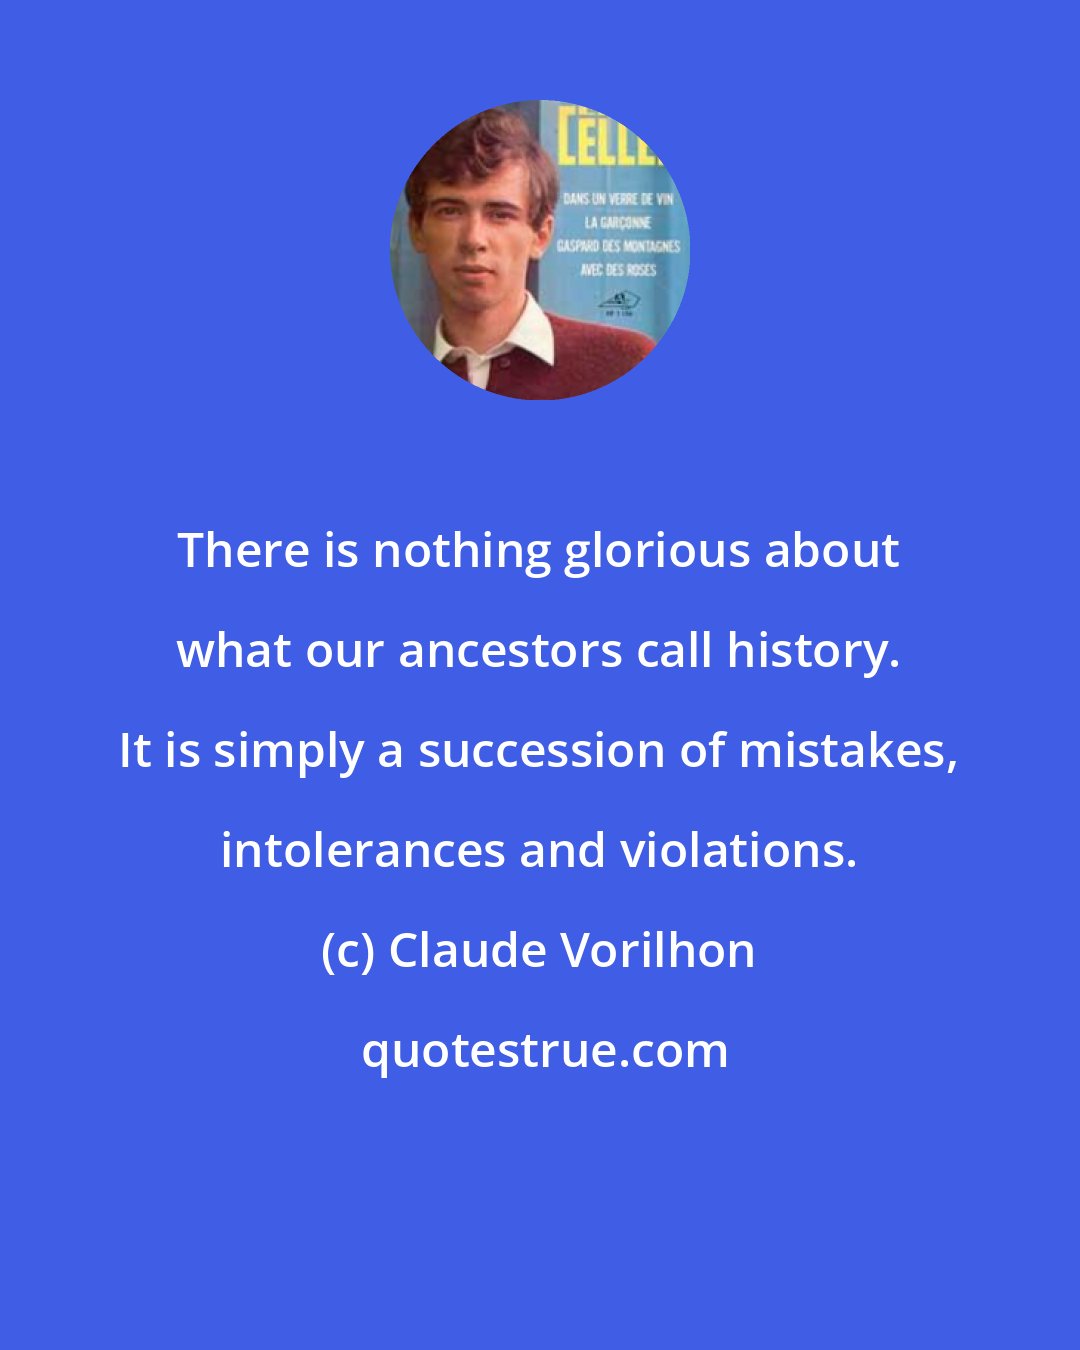 Claude Vorilhon: There is nothing glorious about what our ancestors call history. It is simply a succession of mistakes, intolerances and violations.